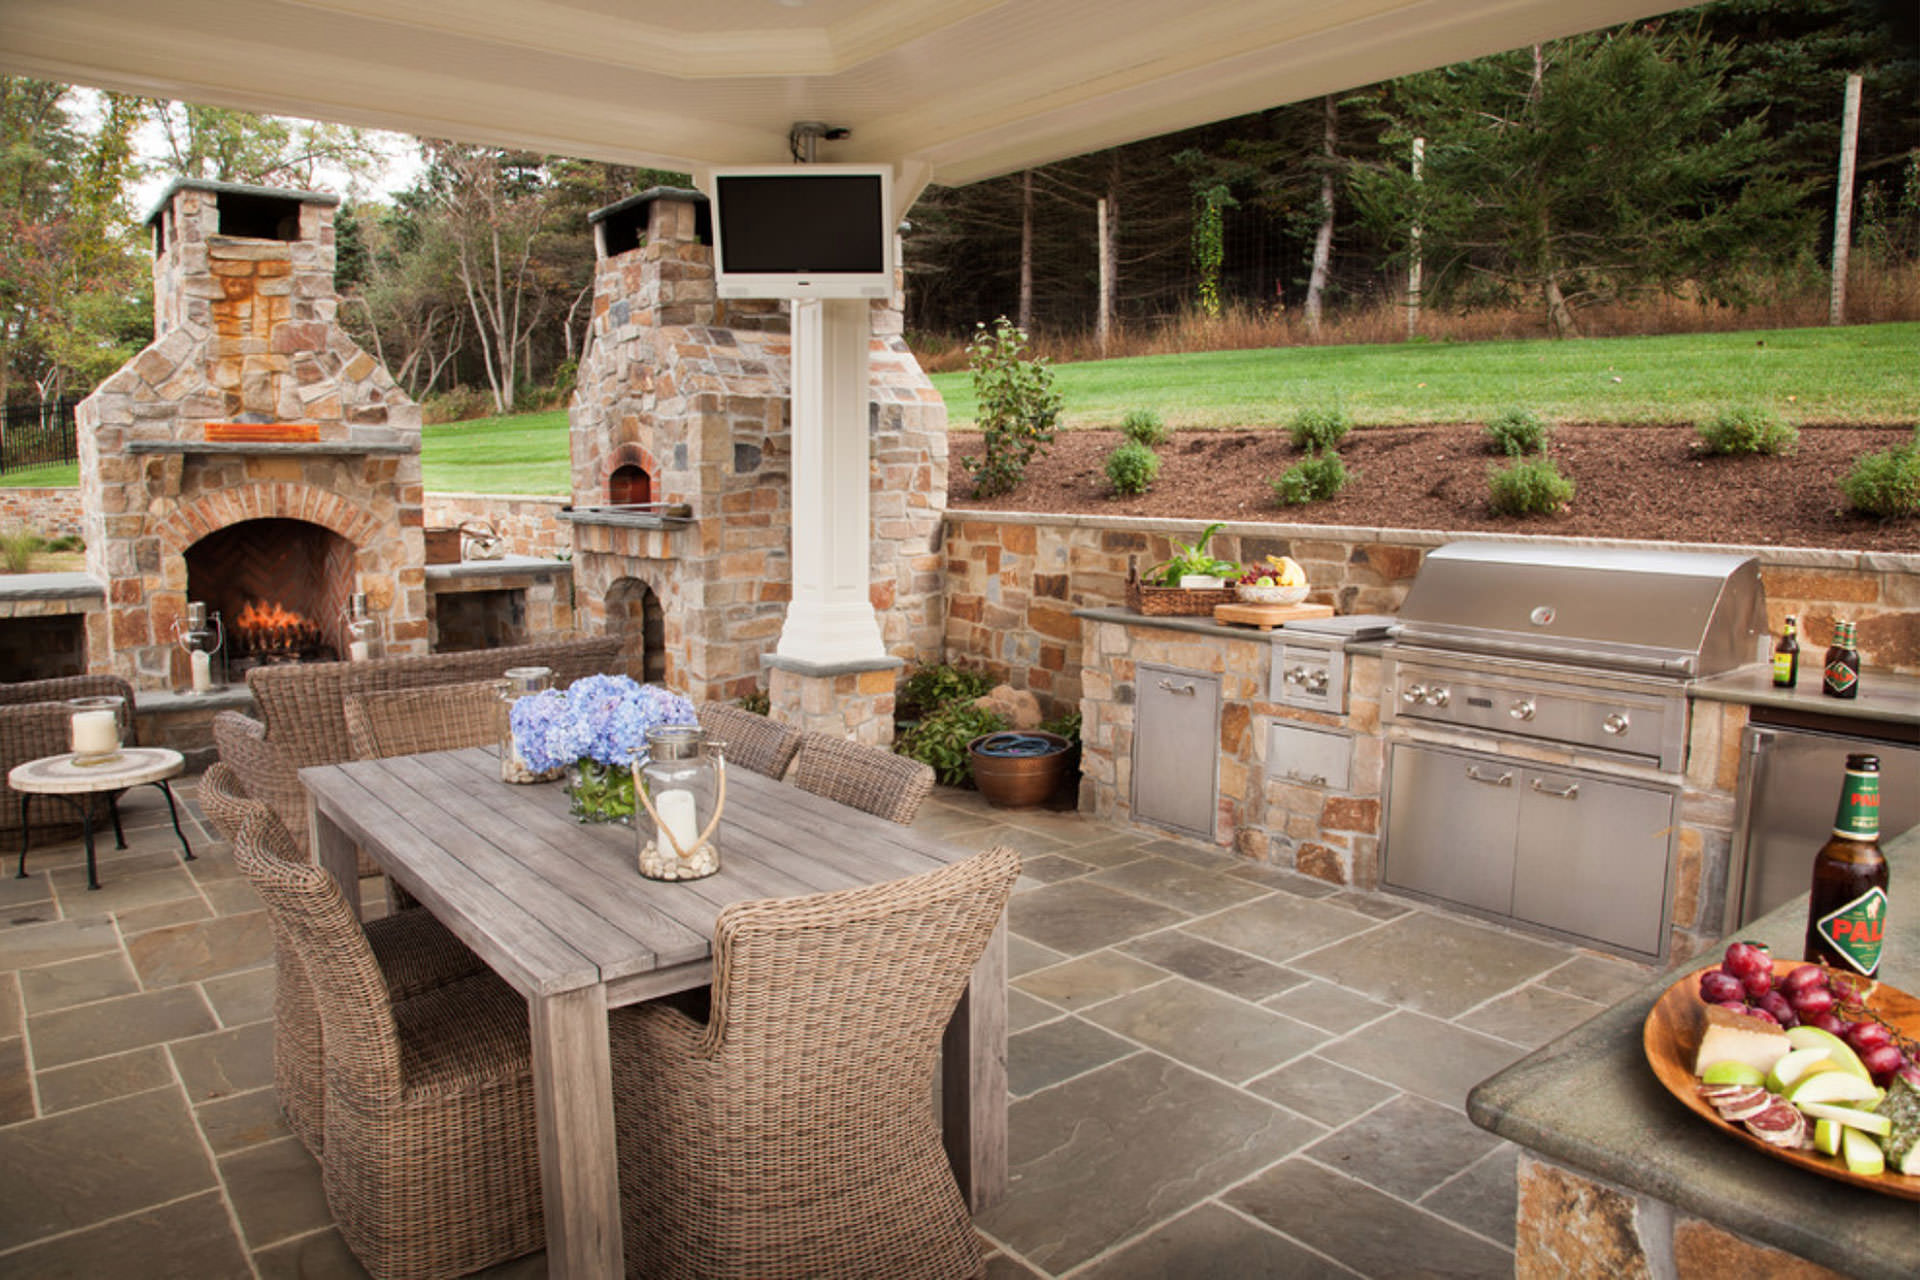 outdoor coverd space for table outdoor kitchen and fireplace